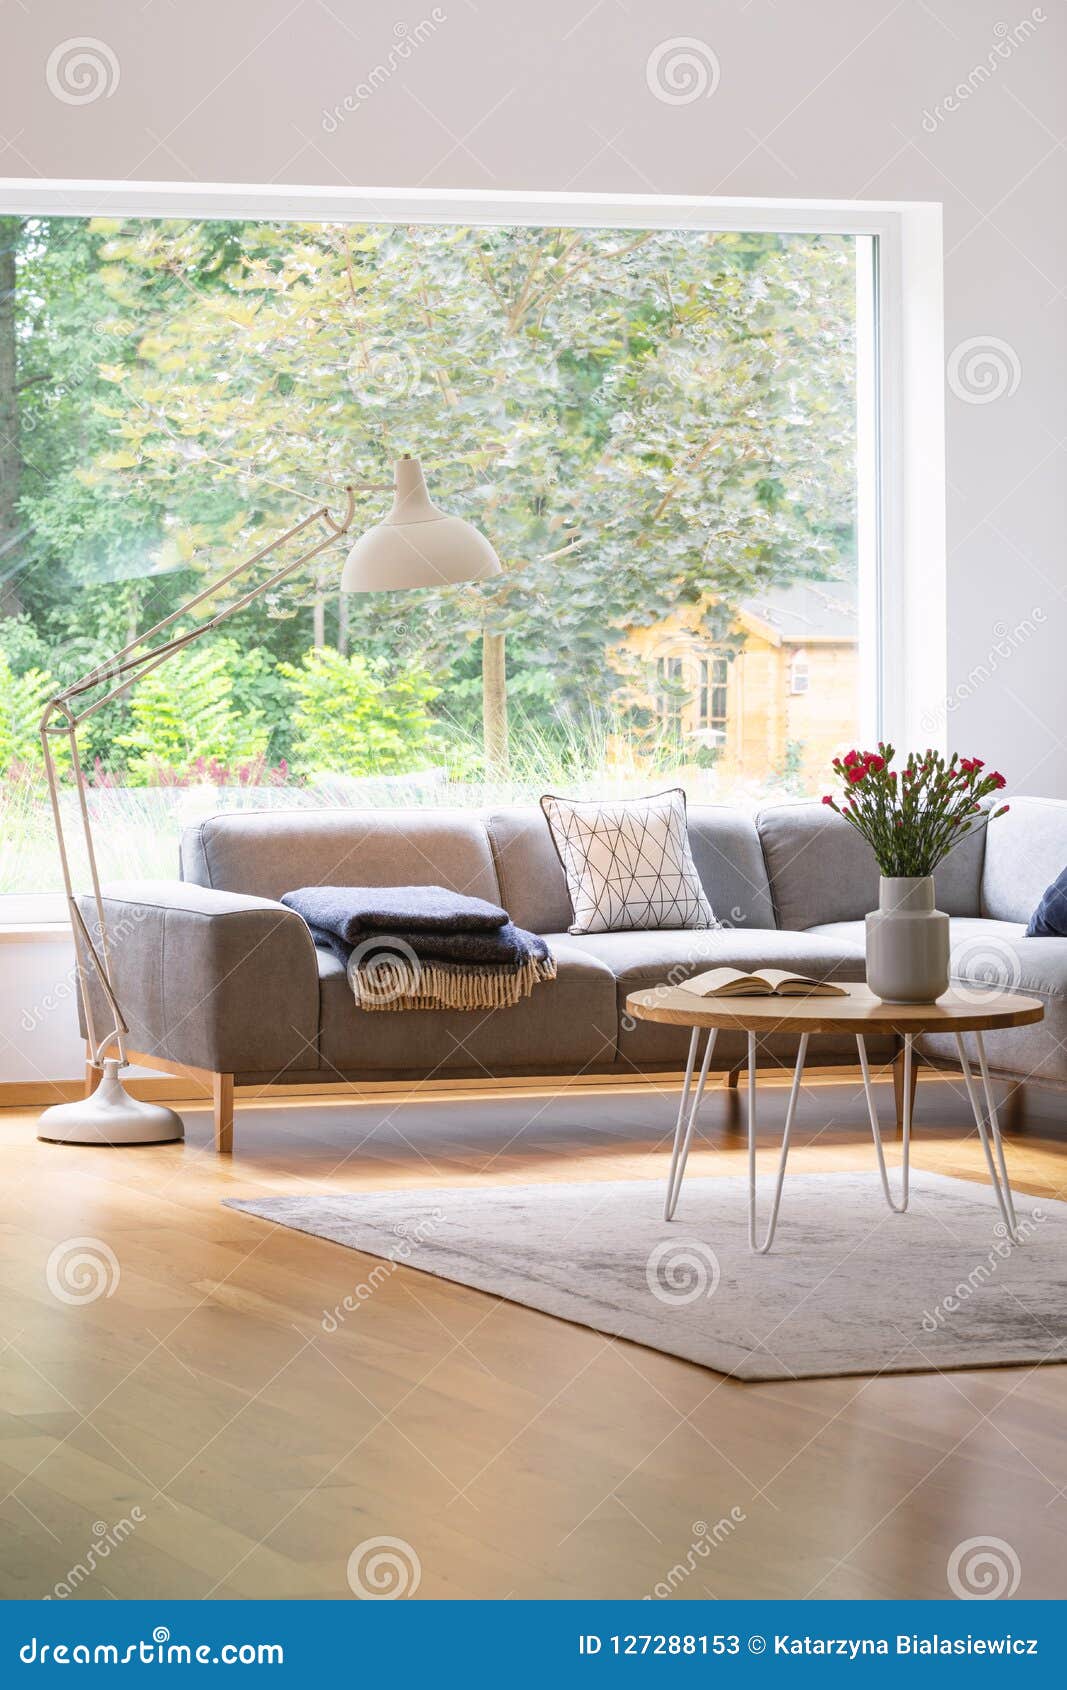 Large Industrial Style Floor Lamp Above An Elegant Sofa In A